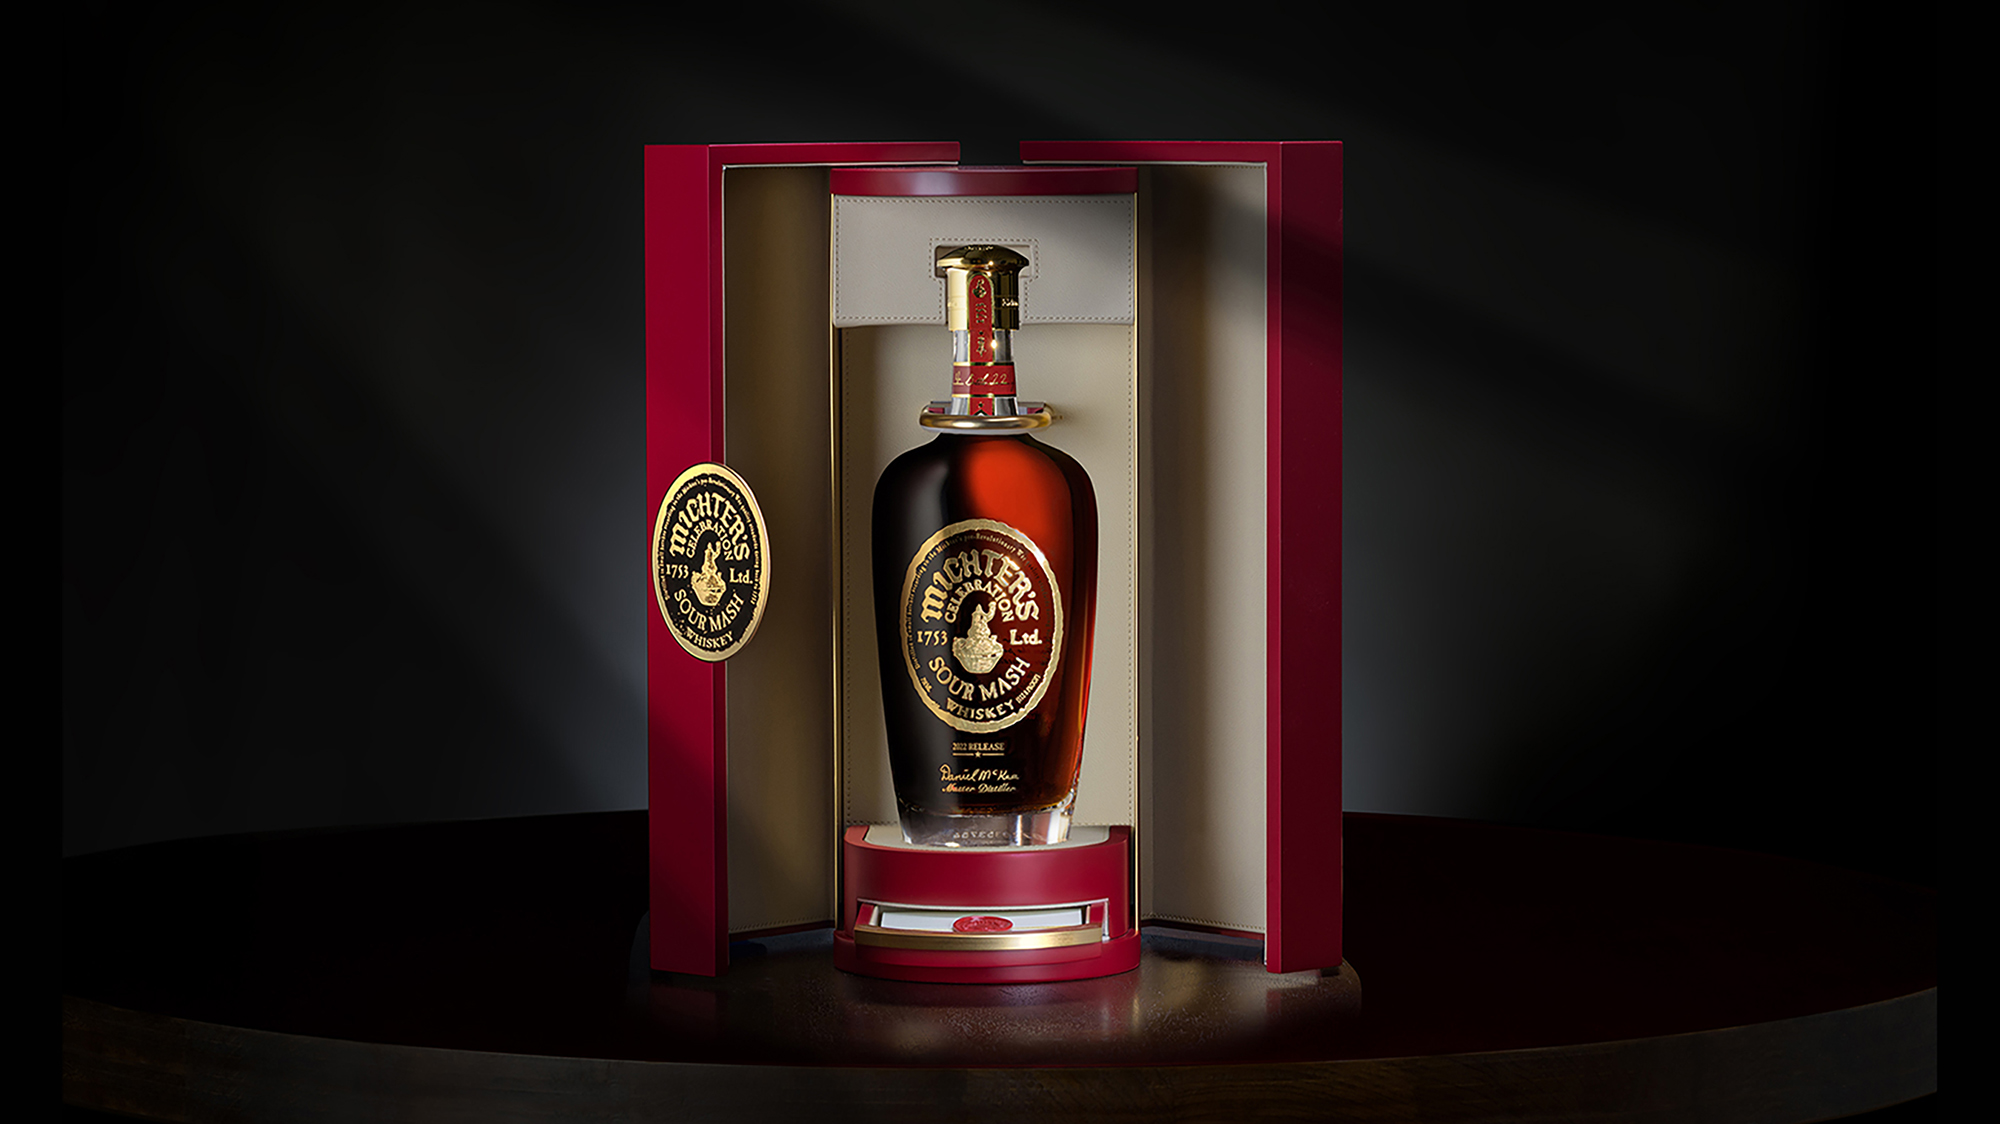 Michter’s Celebration Sour Mash Is Back For The First Time In Almost 5 Years, And Only 328 Bottles Are Available